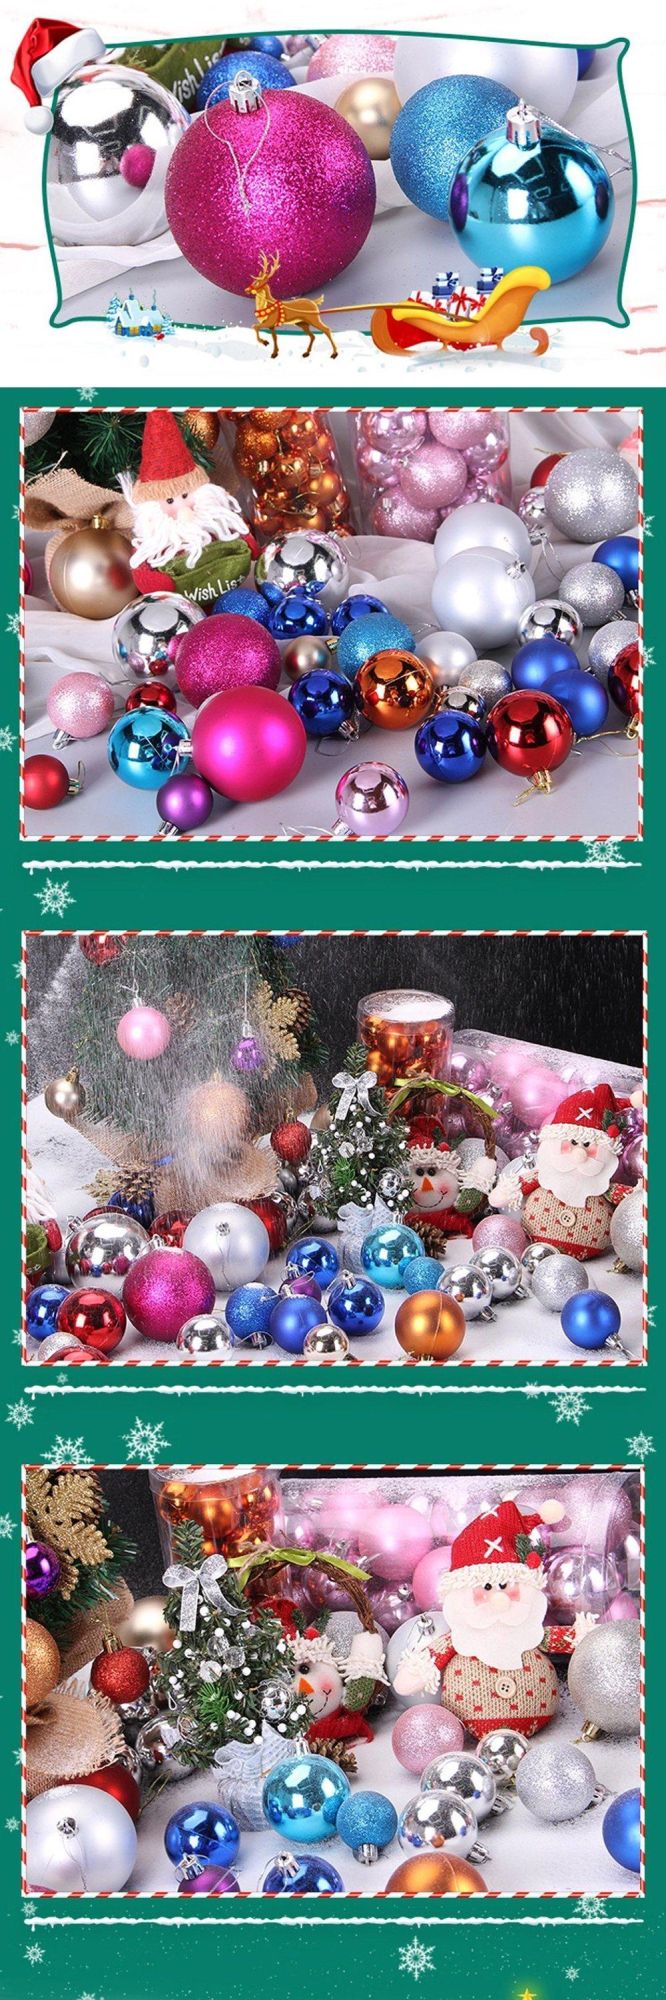 2020 New Party Decoration Christmas Personlized Gift Christmas Ornament Christmas Decoration Christmas Gift Christmas Shiny Ball